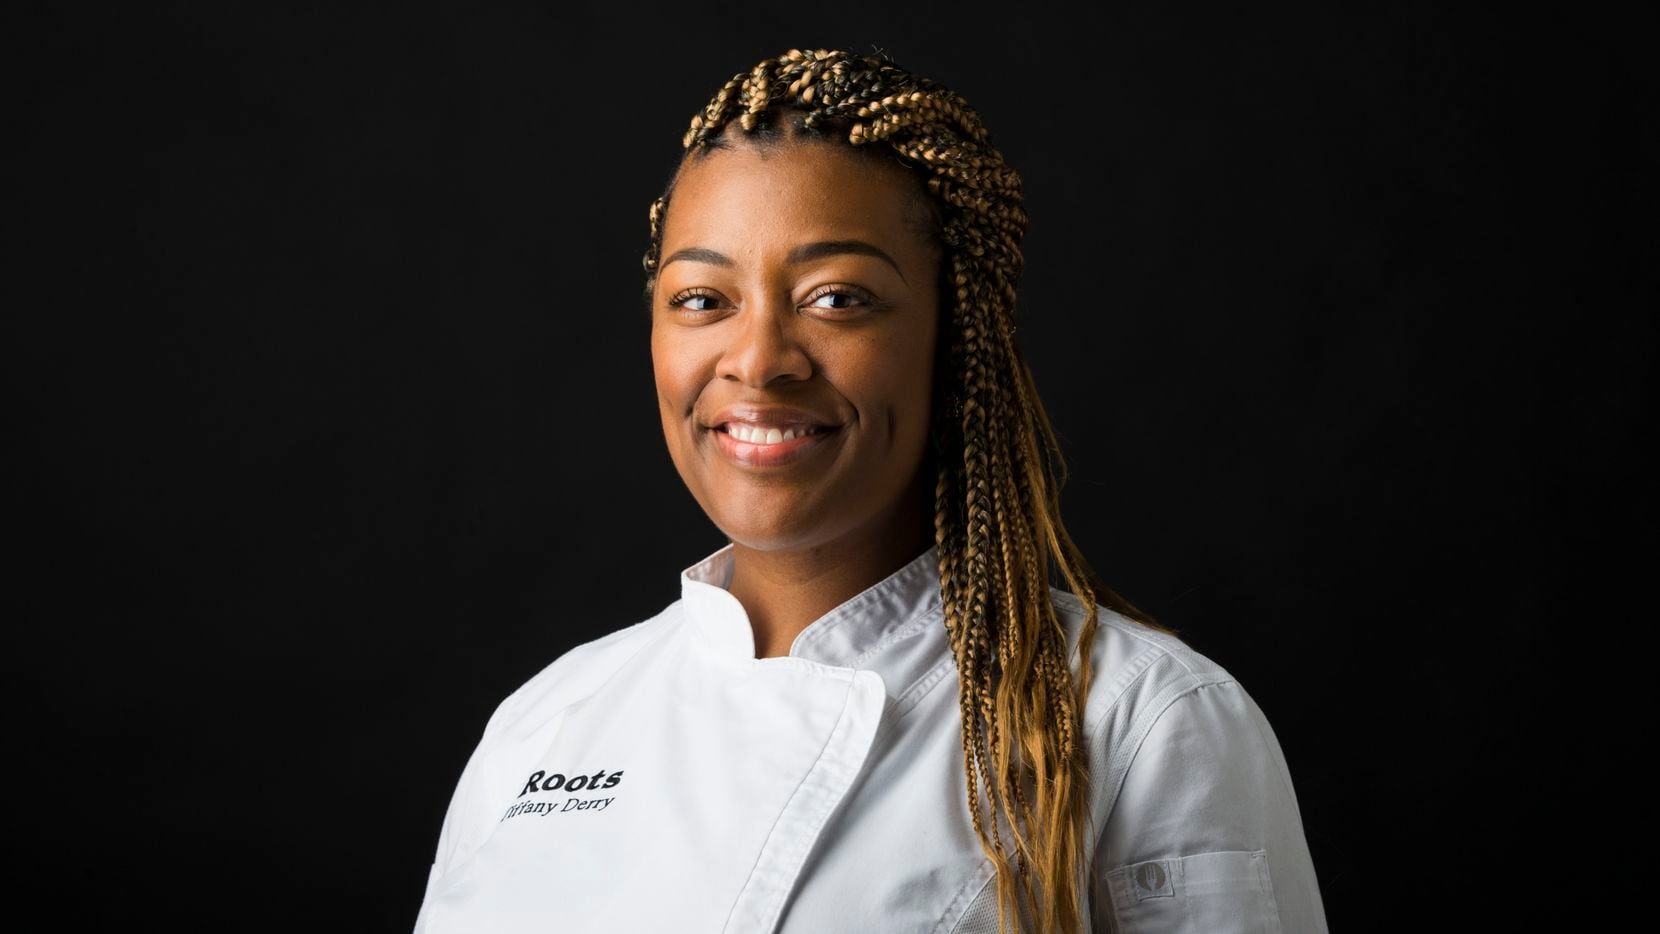 Chef Tiffany Derry opened Roots Southern Table in mid-2021 in Farmers Branch, a suburb of...